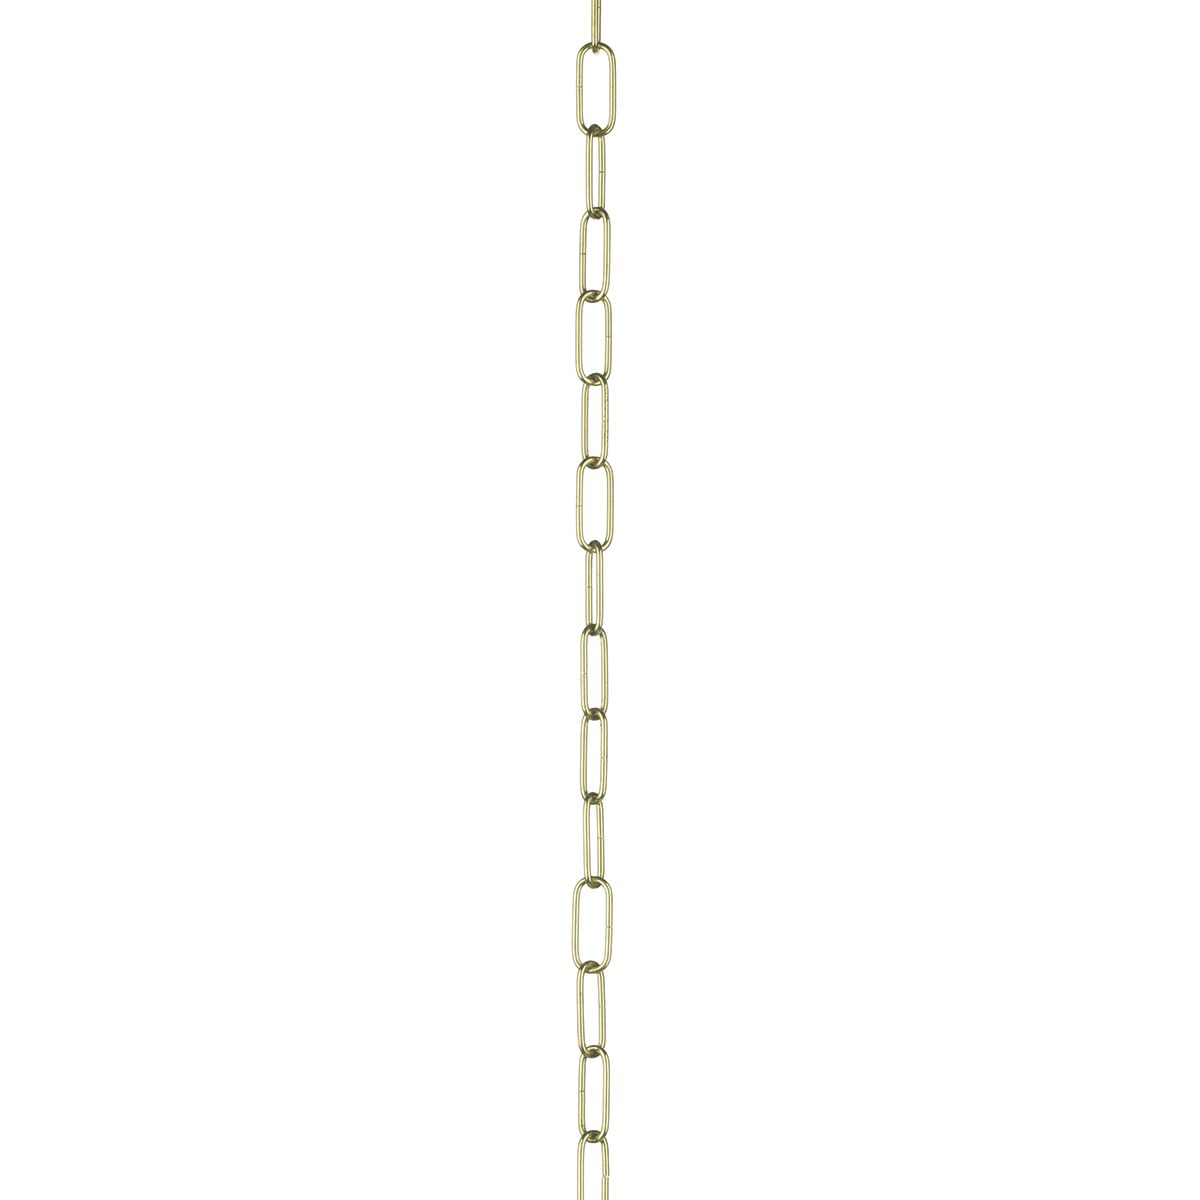 David Hunt Lighting Spare Chain For Station Pendant 0.5m 6 Colours